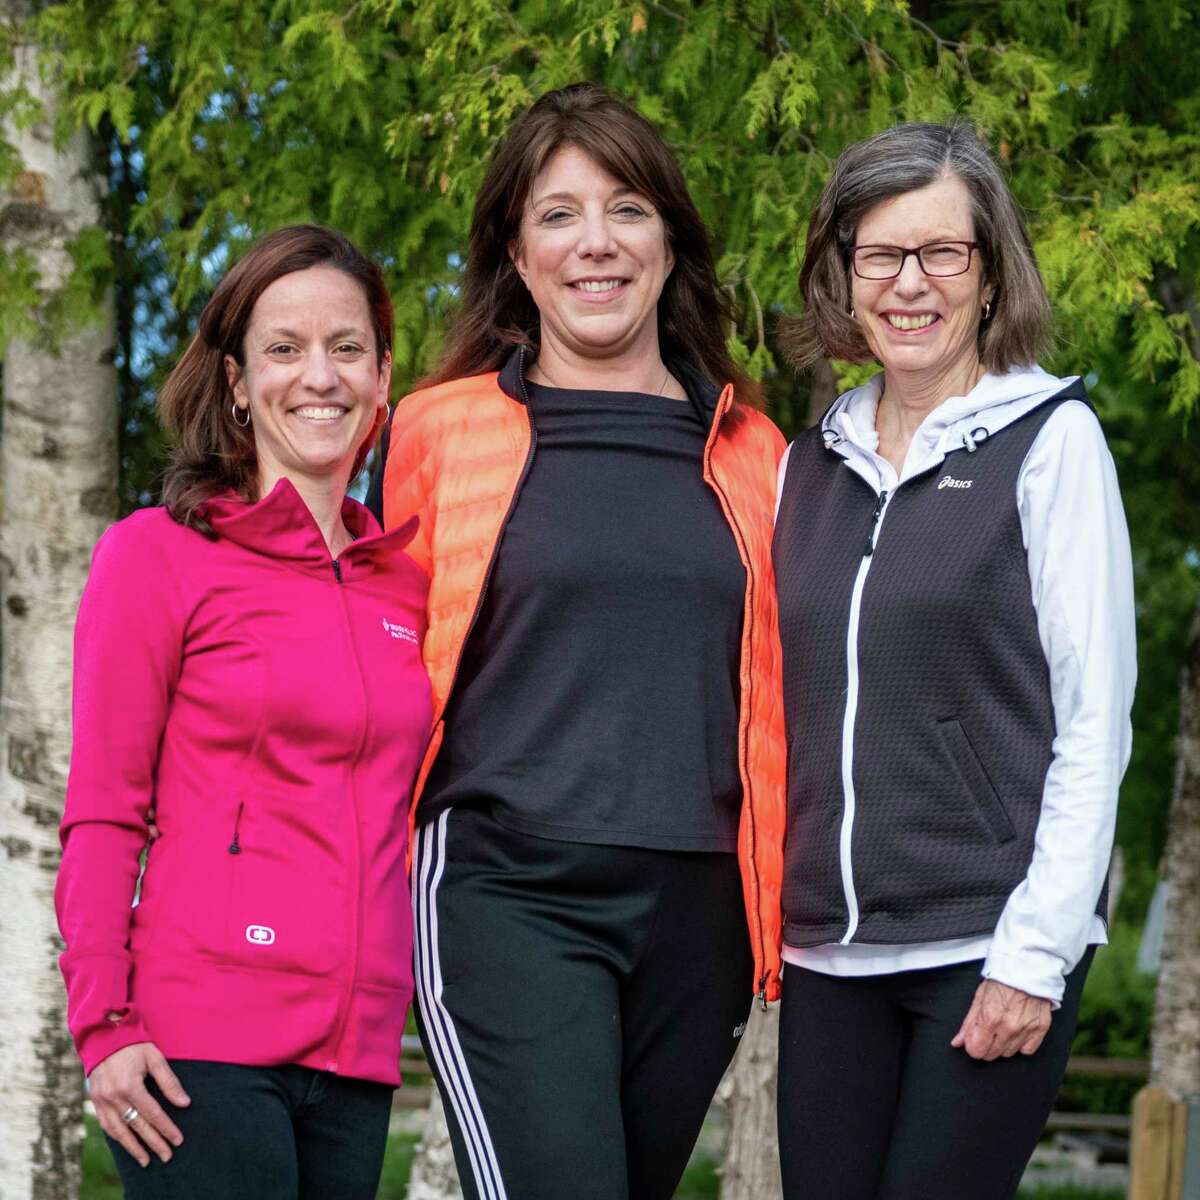 Adrienne Stephen Jones (left), Nancy Smith (middle)and Michelle Russell (right) will be participating in the Ironman event in September to raise money for Paul Oliver. (Courtesy Photo)